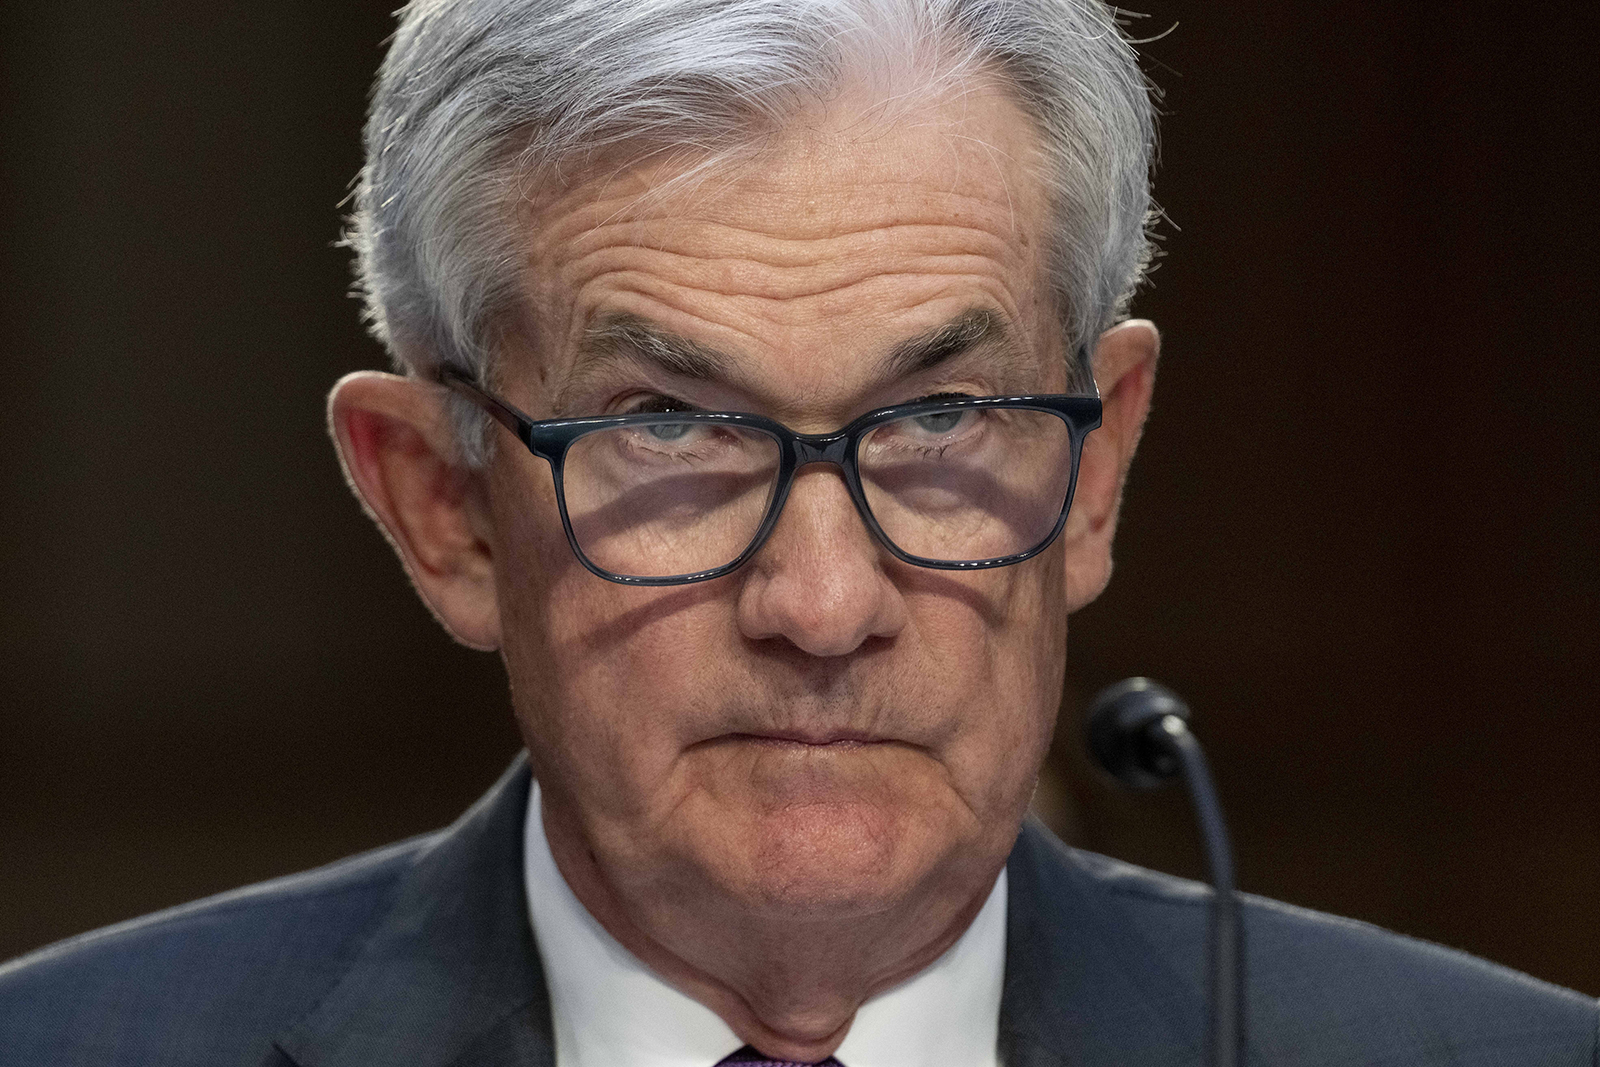 Federal Reserve Chairman Jerome Powell during a Senate Banking Committee hearing on Capitol Hill, on March 7.